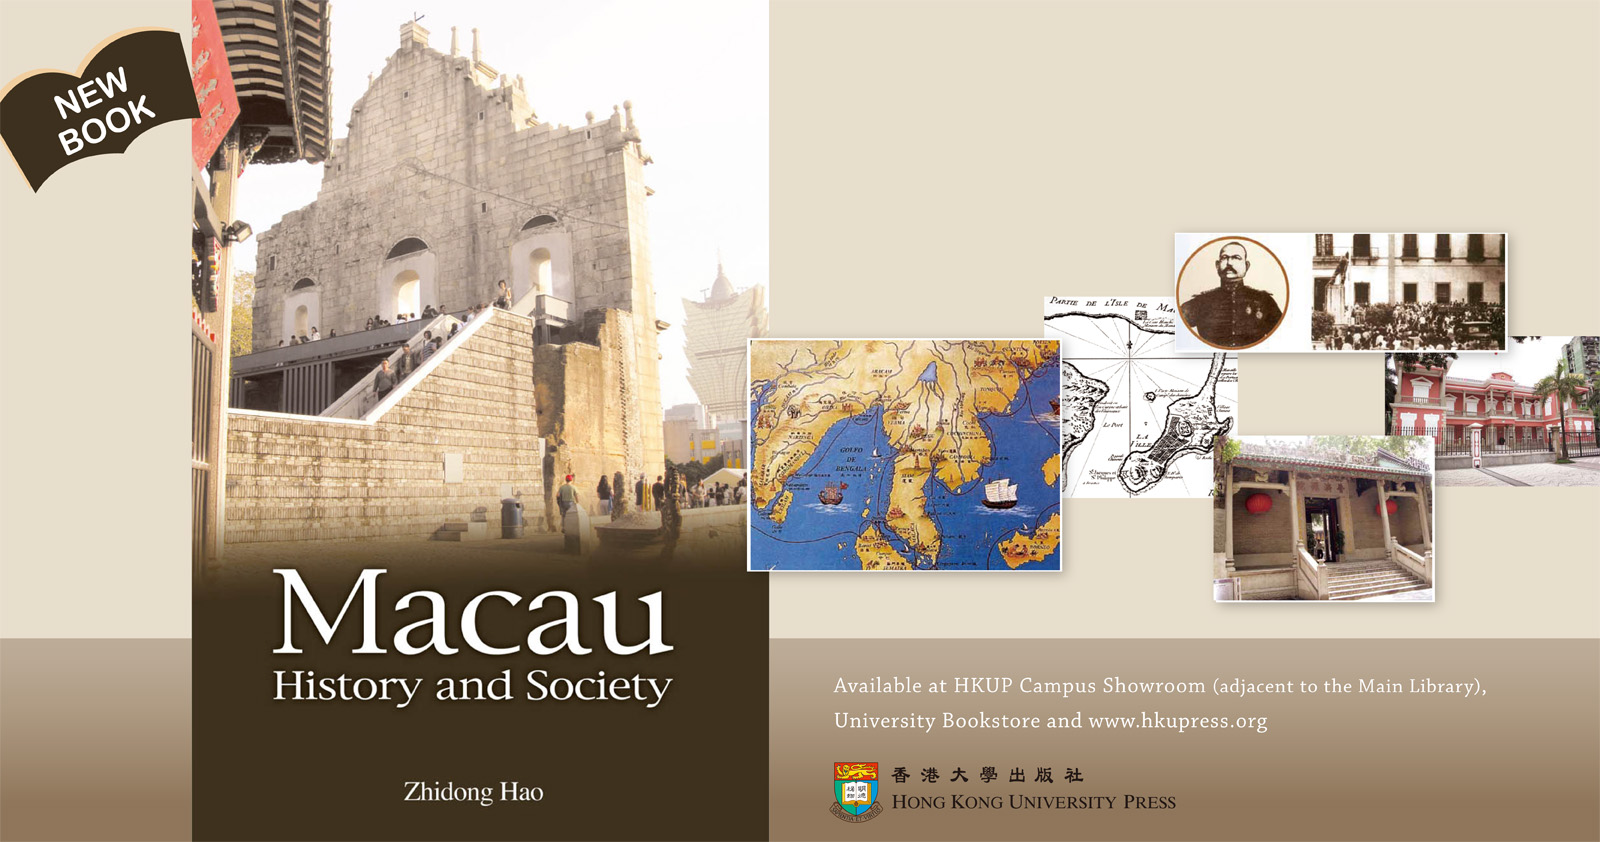 New Book from HKU Press - Macau History and Society